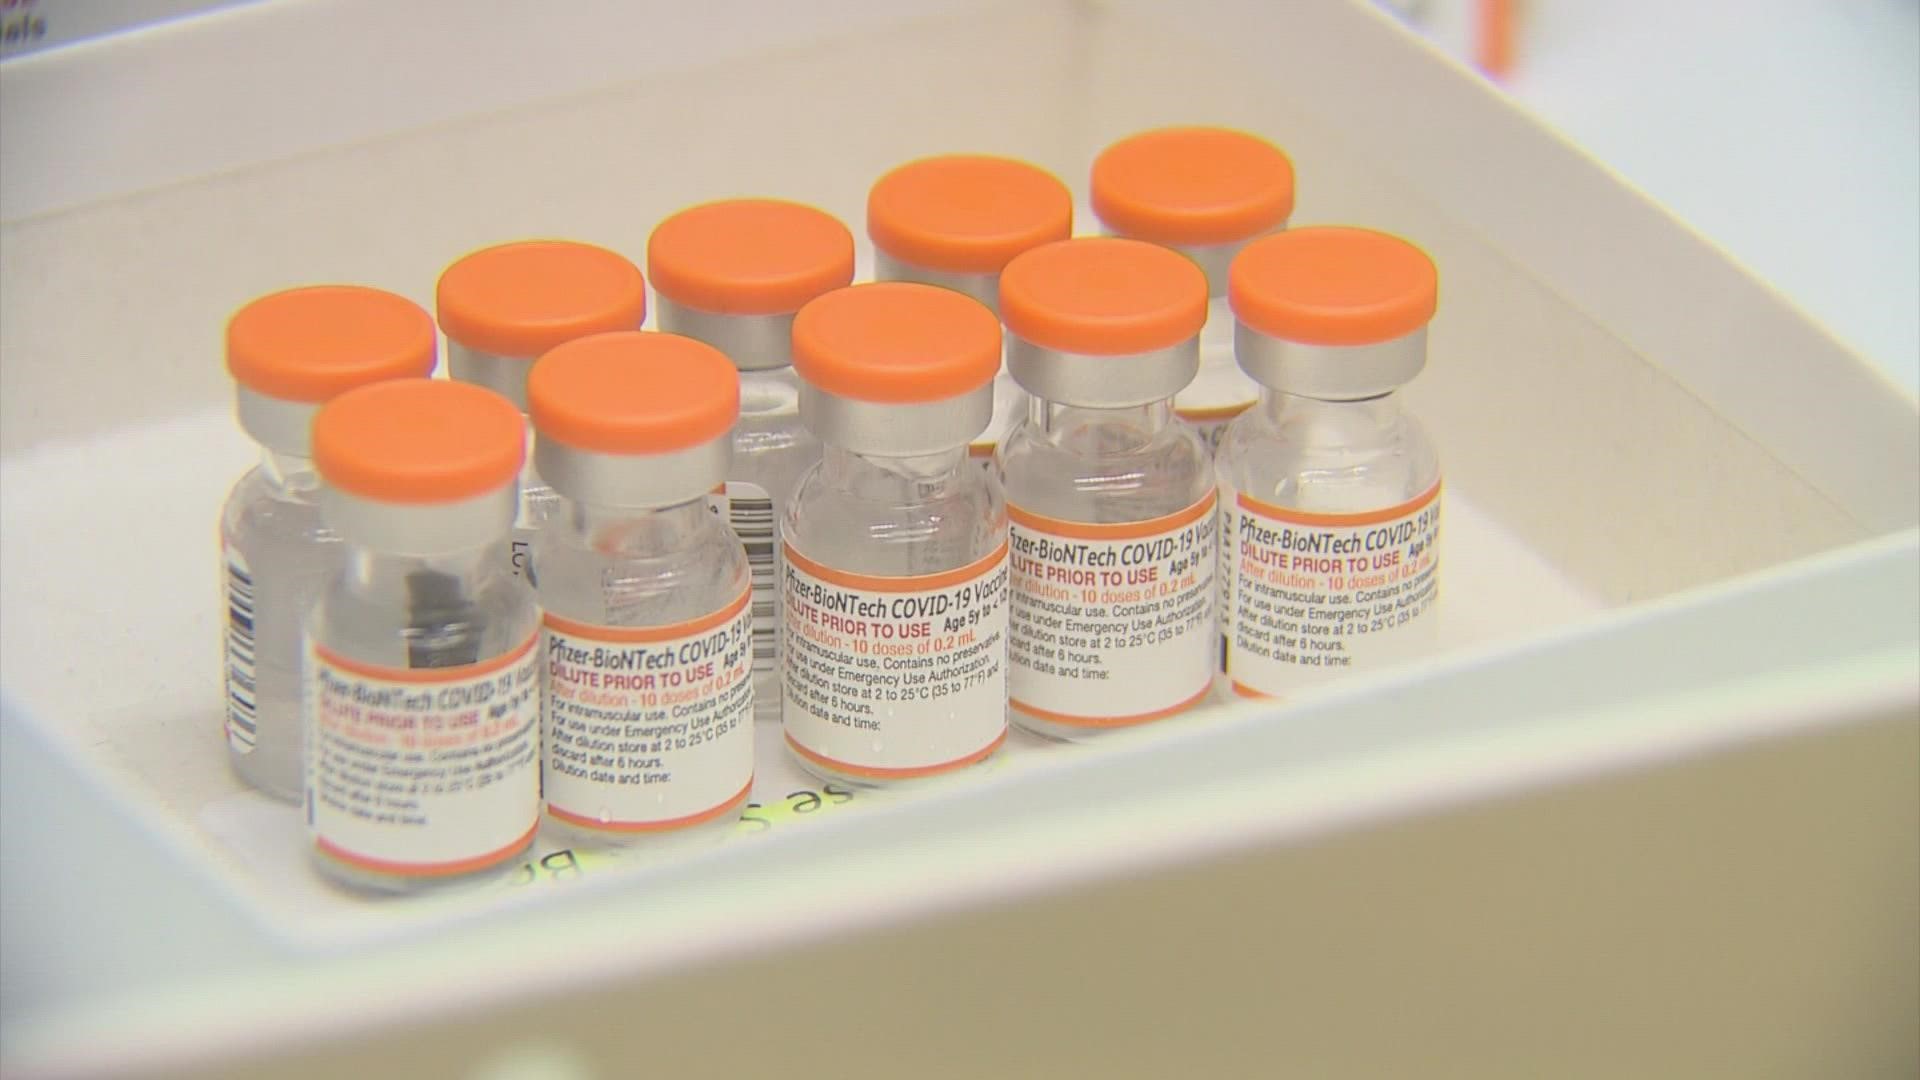 Seattle Children’s requested a large number of doses from the state but were only allotted 600 in the first round of shipments.